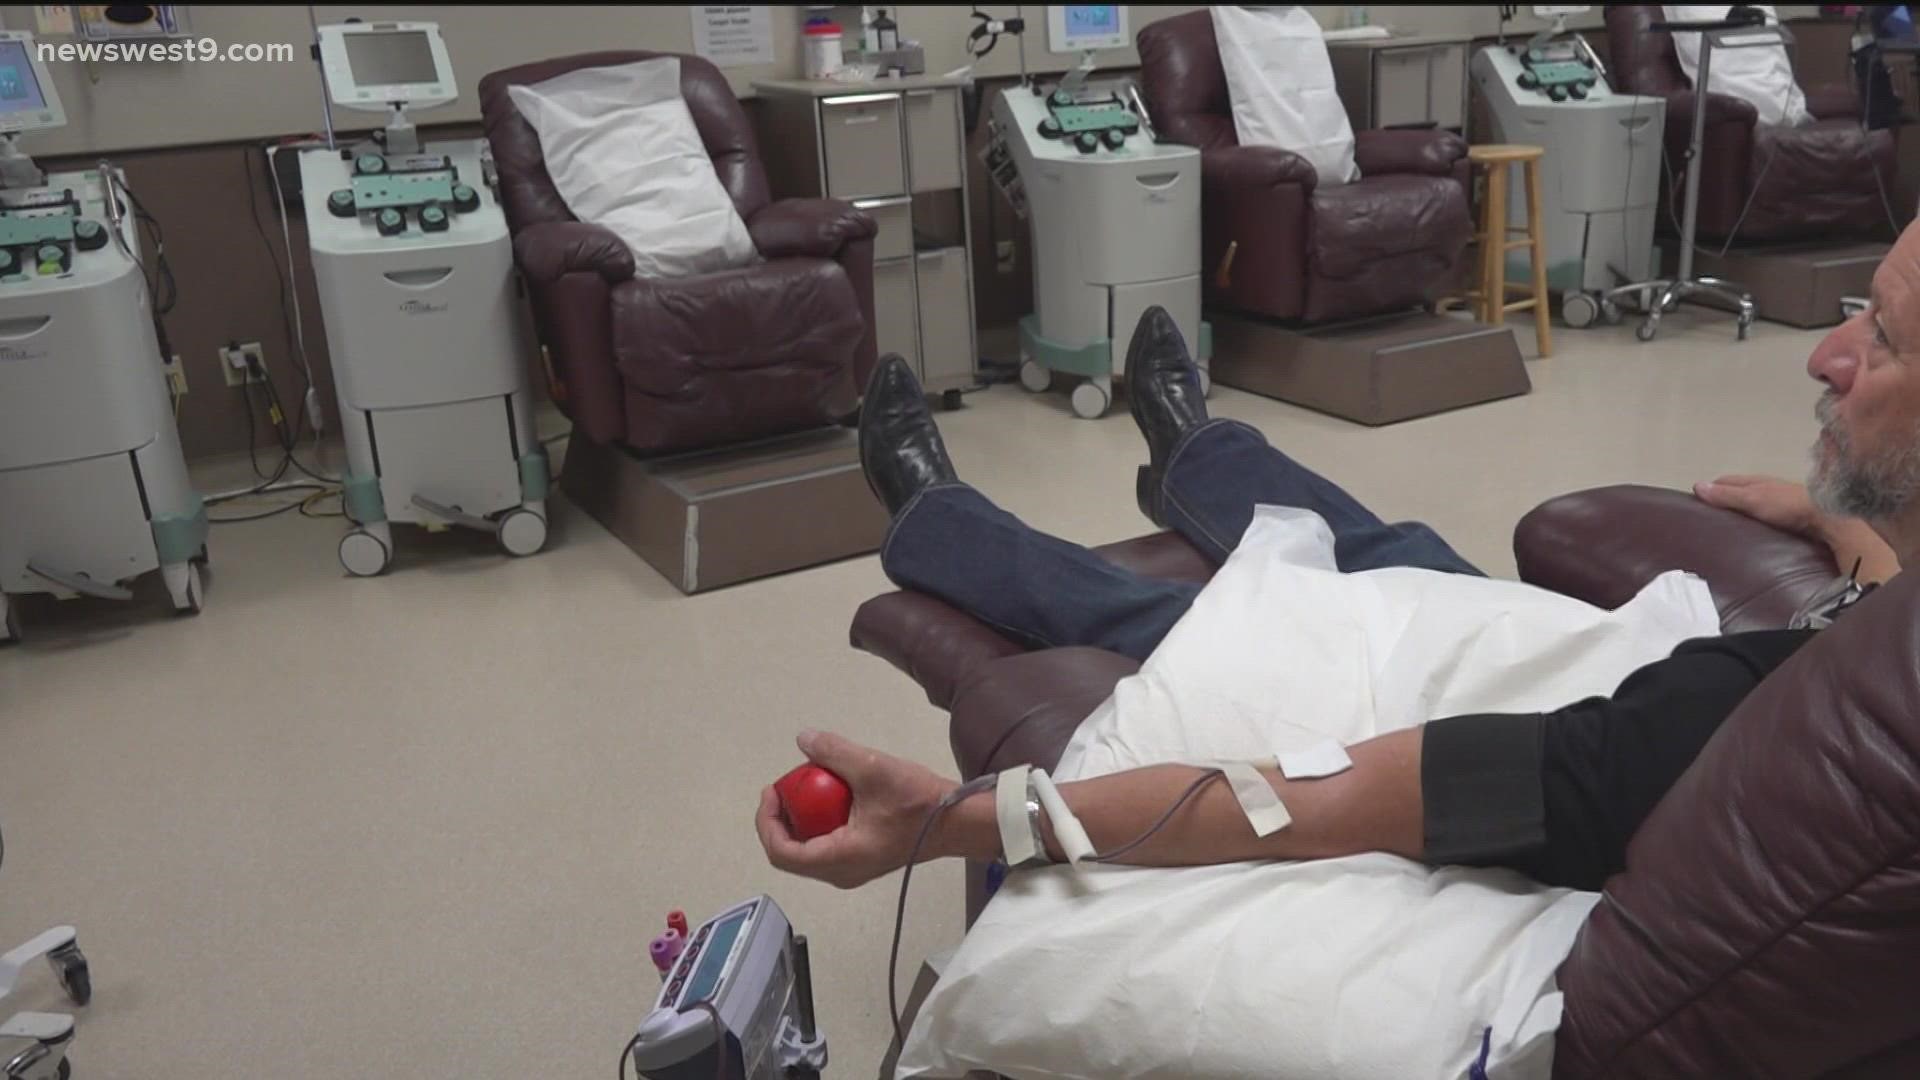 Every donor will get a free ham for Thanksgiving after they donate their blood.